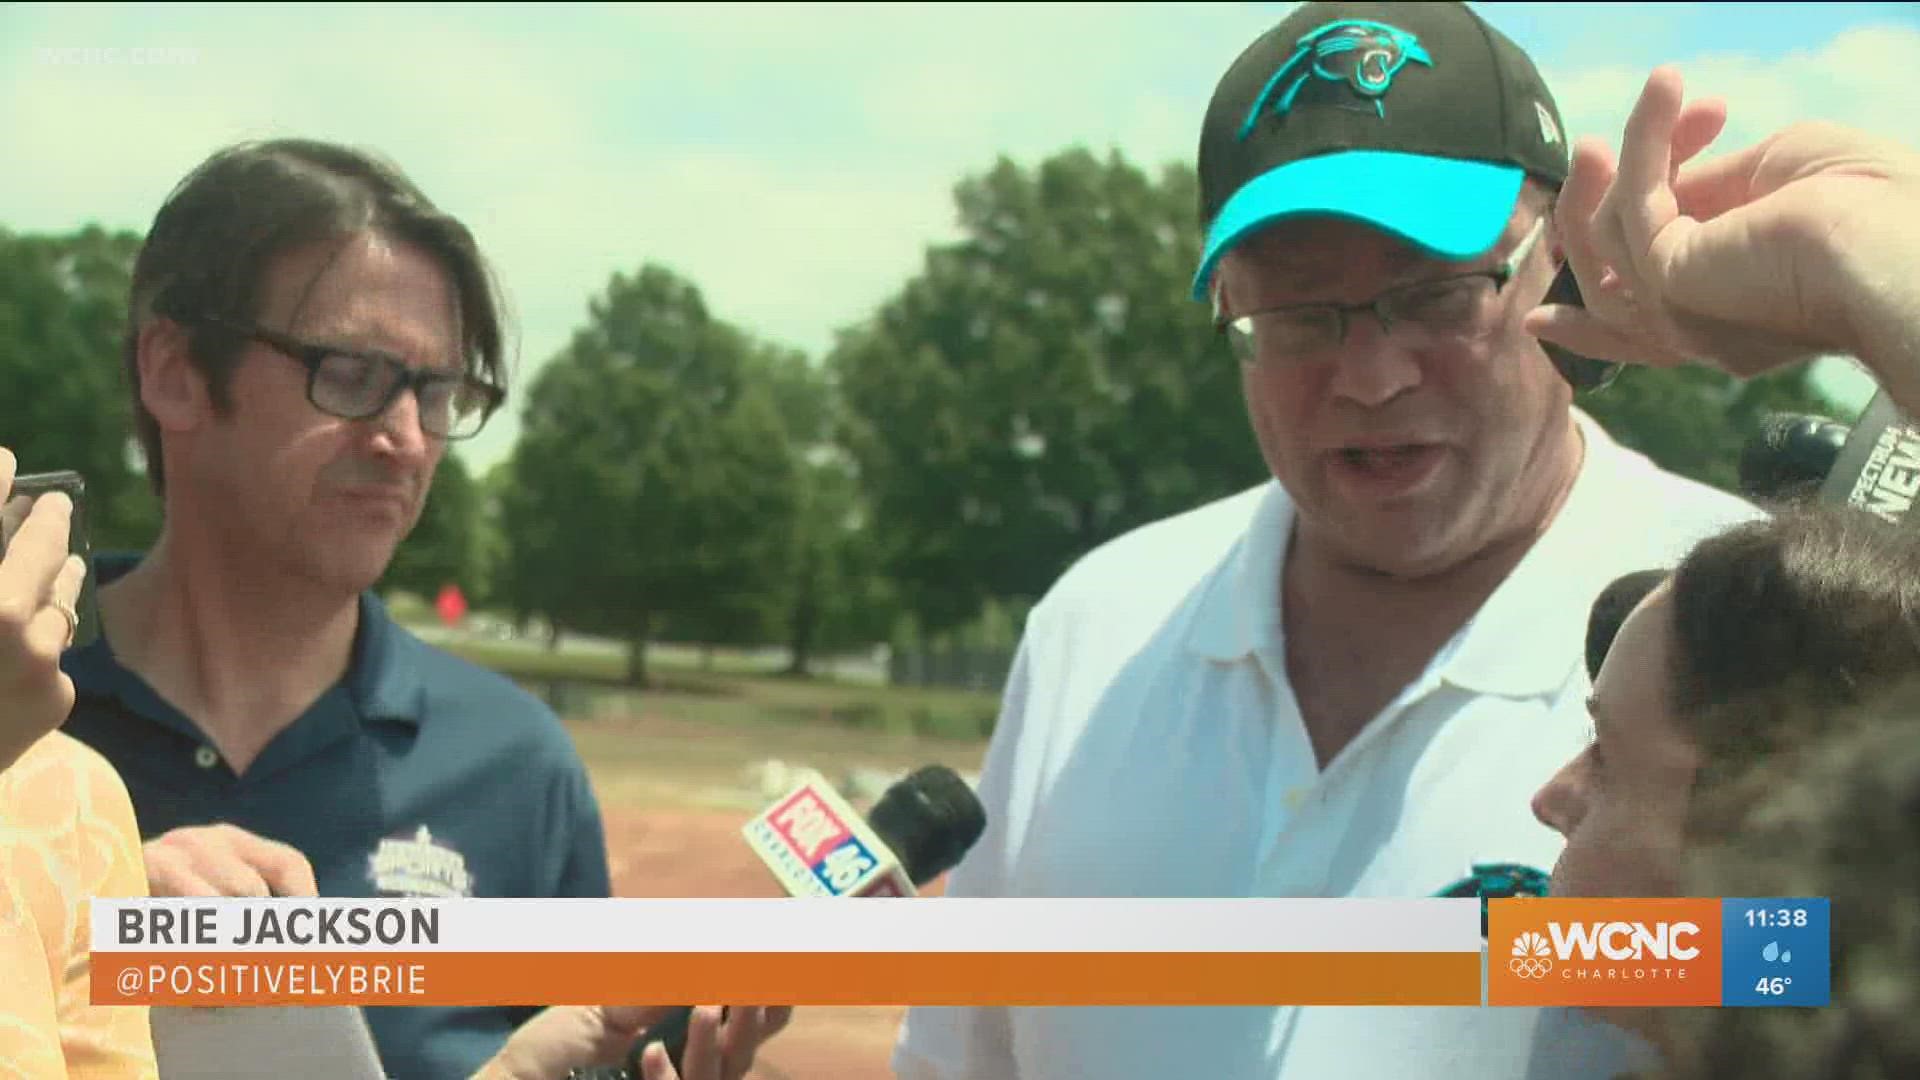 Panthers owner David Tepper is continuing to make an impact off of the field.